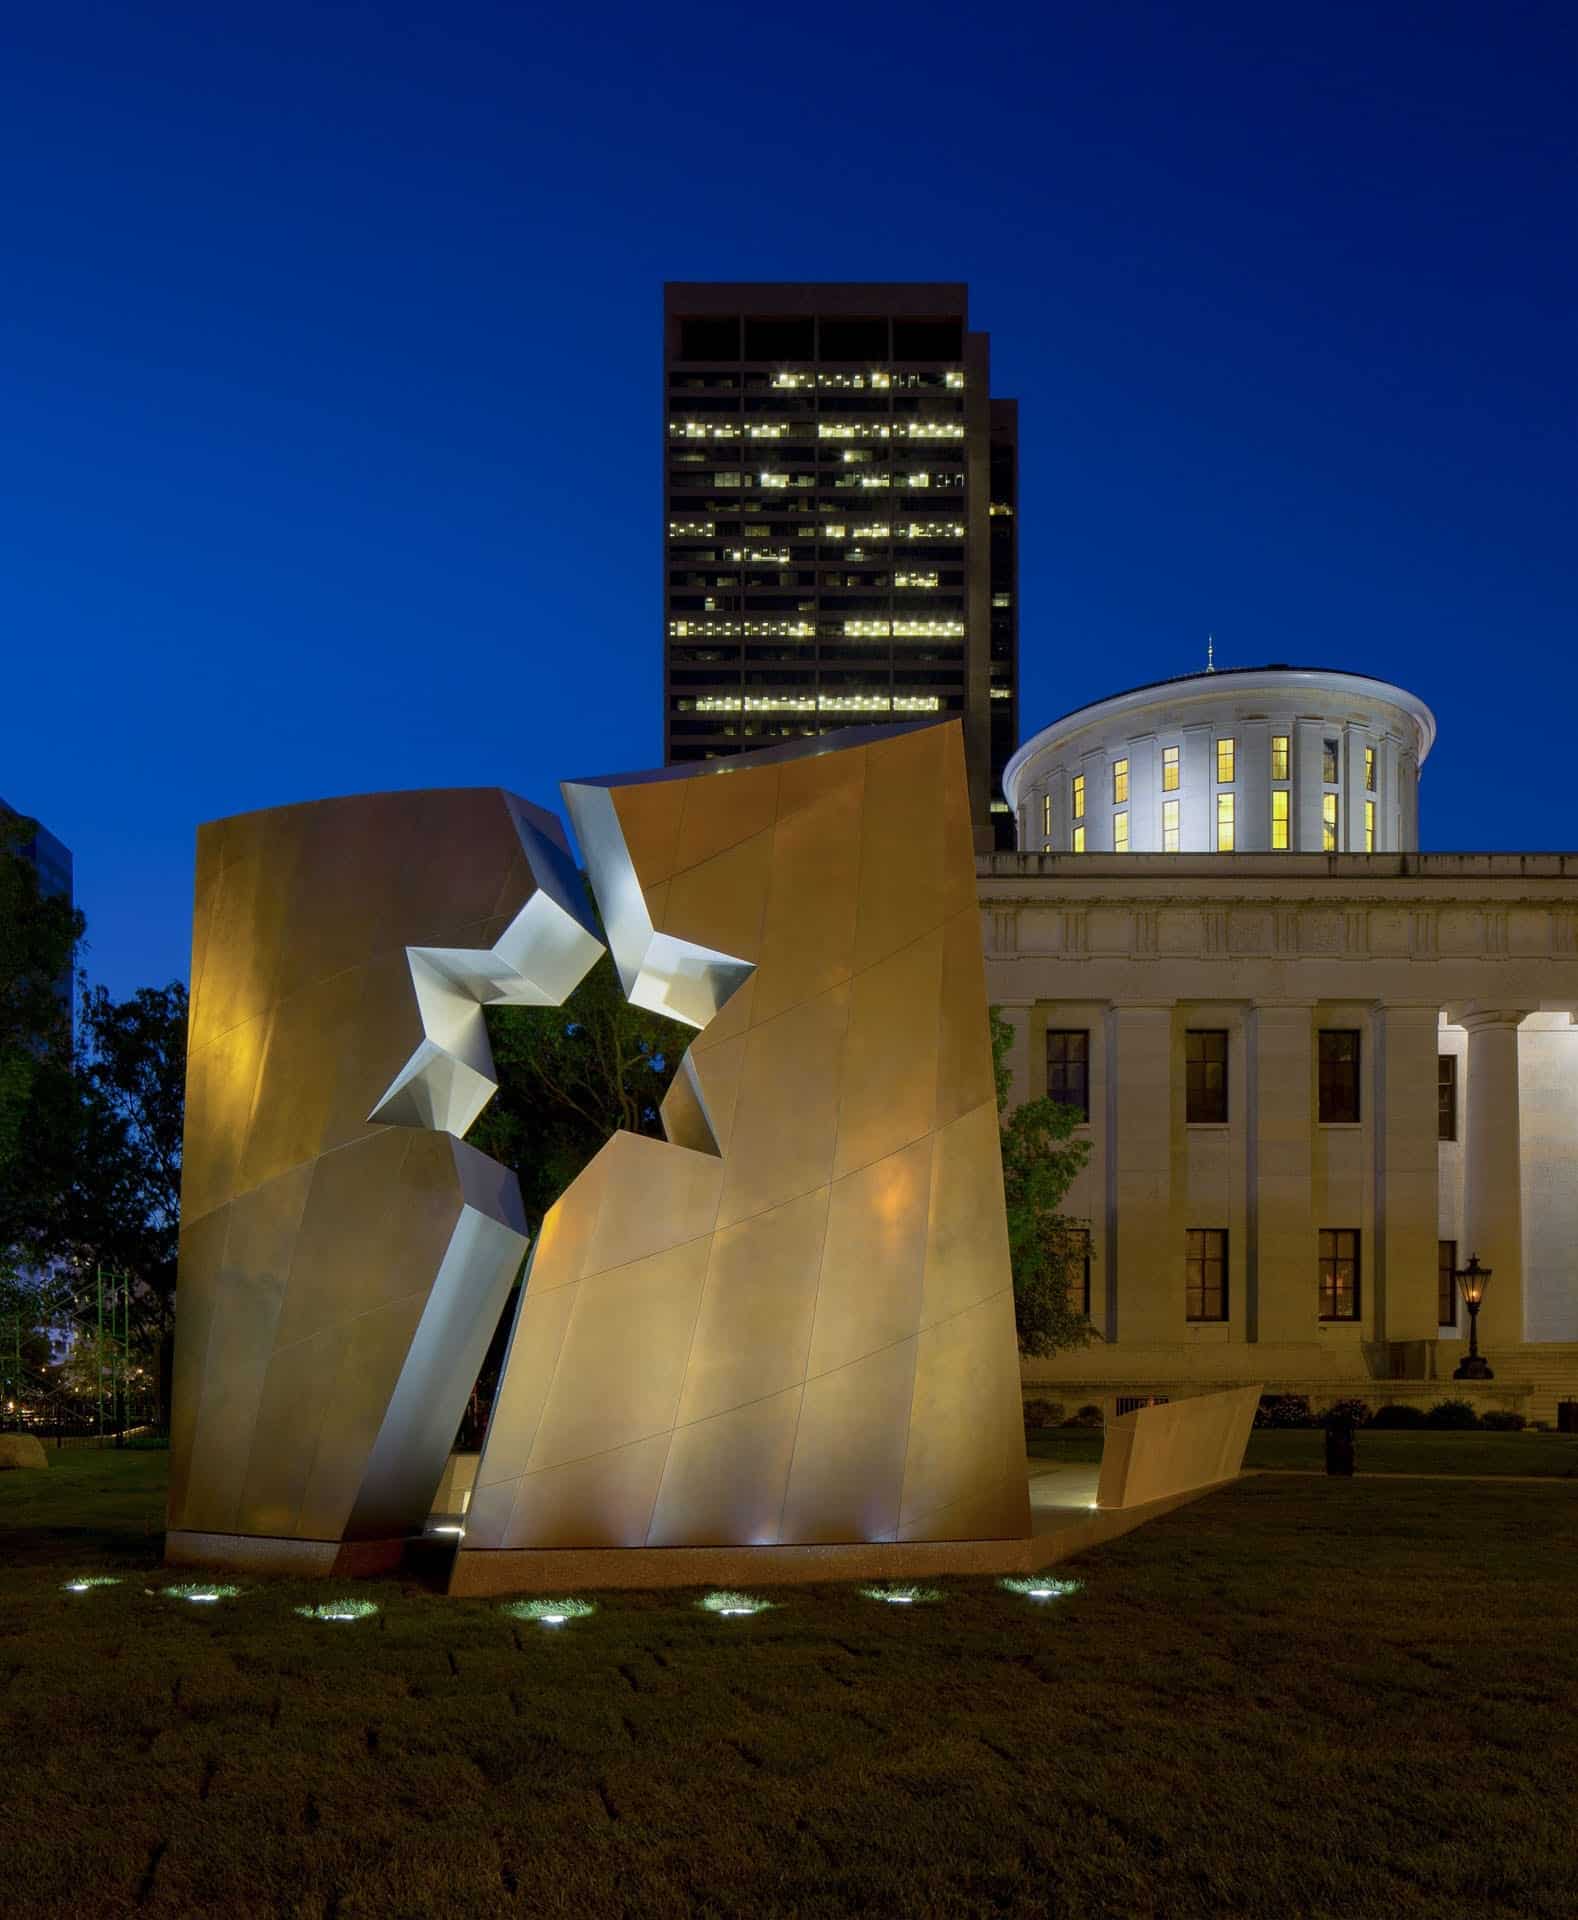 The Ohio Memorial after dusk on the lawn of the Ohio Statehouse